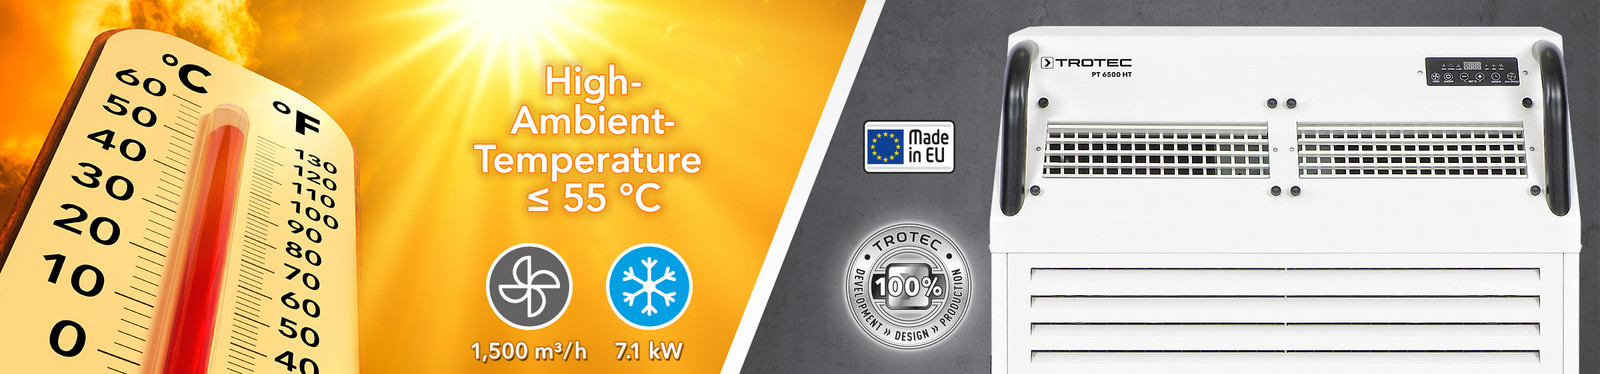 Proven Trotec quality: The PT 6500 HT commercial air conditioner for high ambient temperatures up to +55 °C